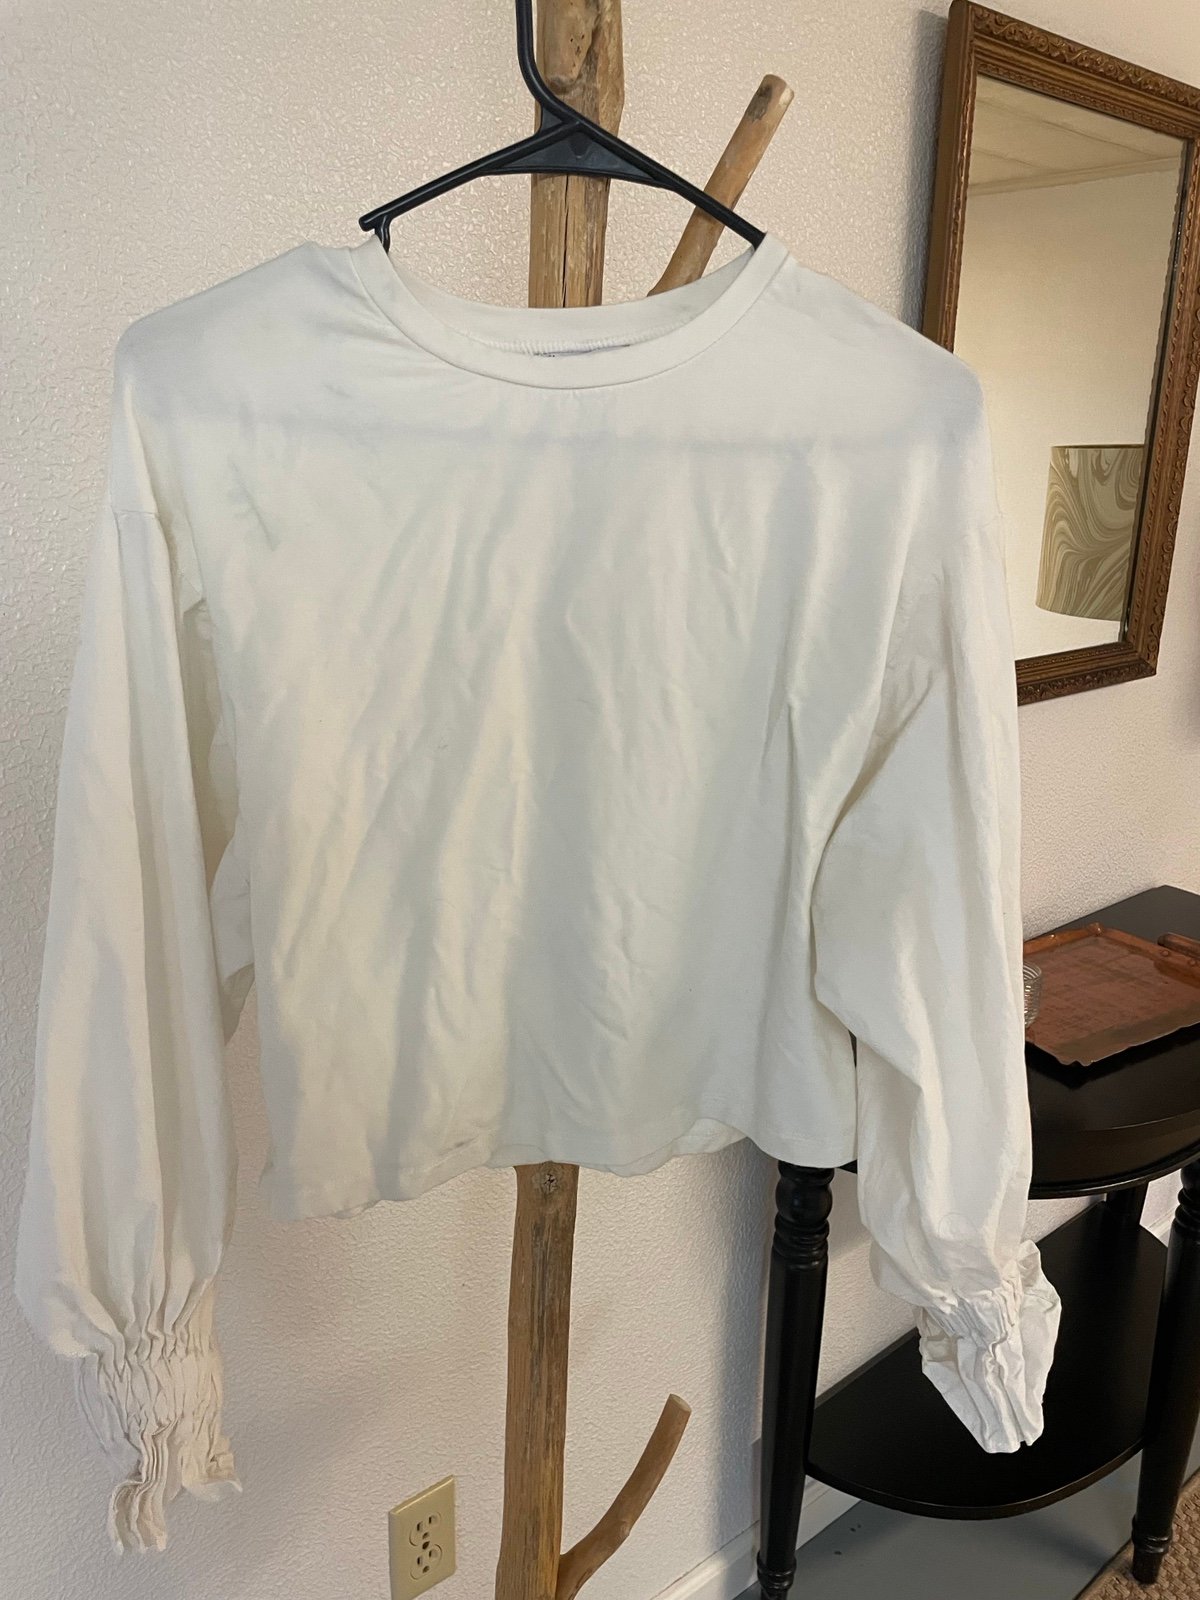 Special offer  Zara top size small. White with puffy sl